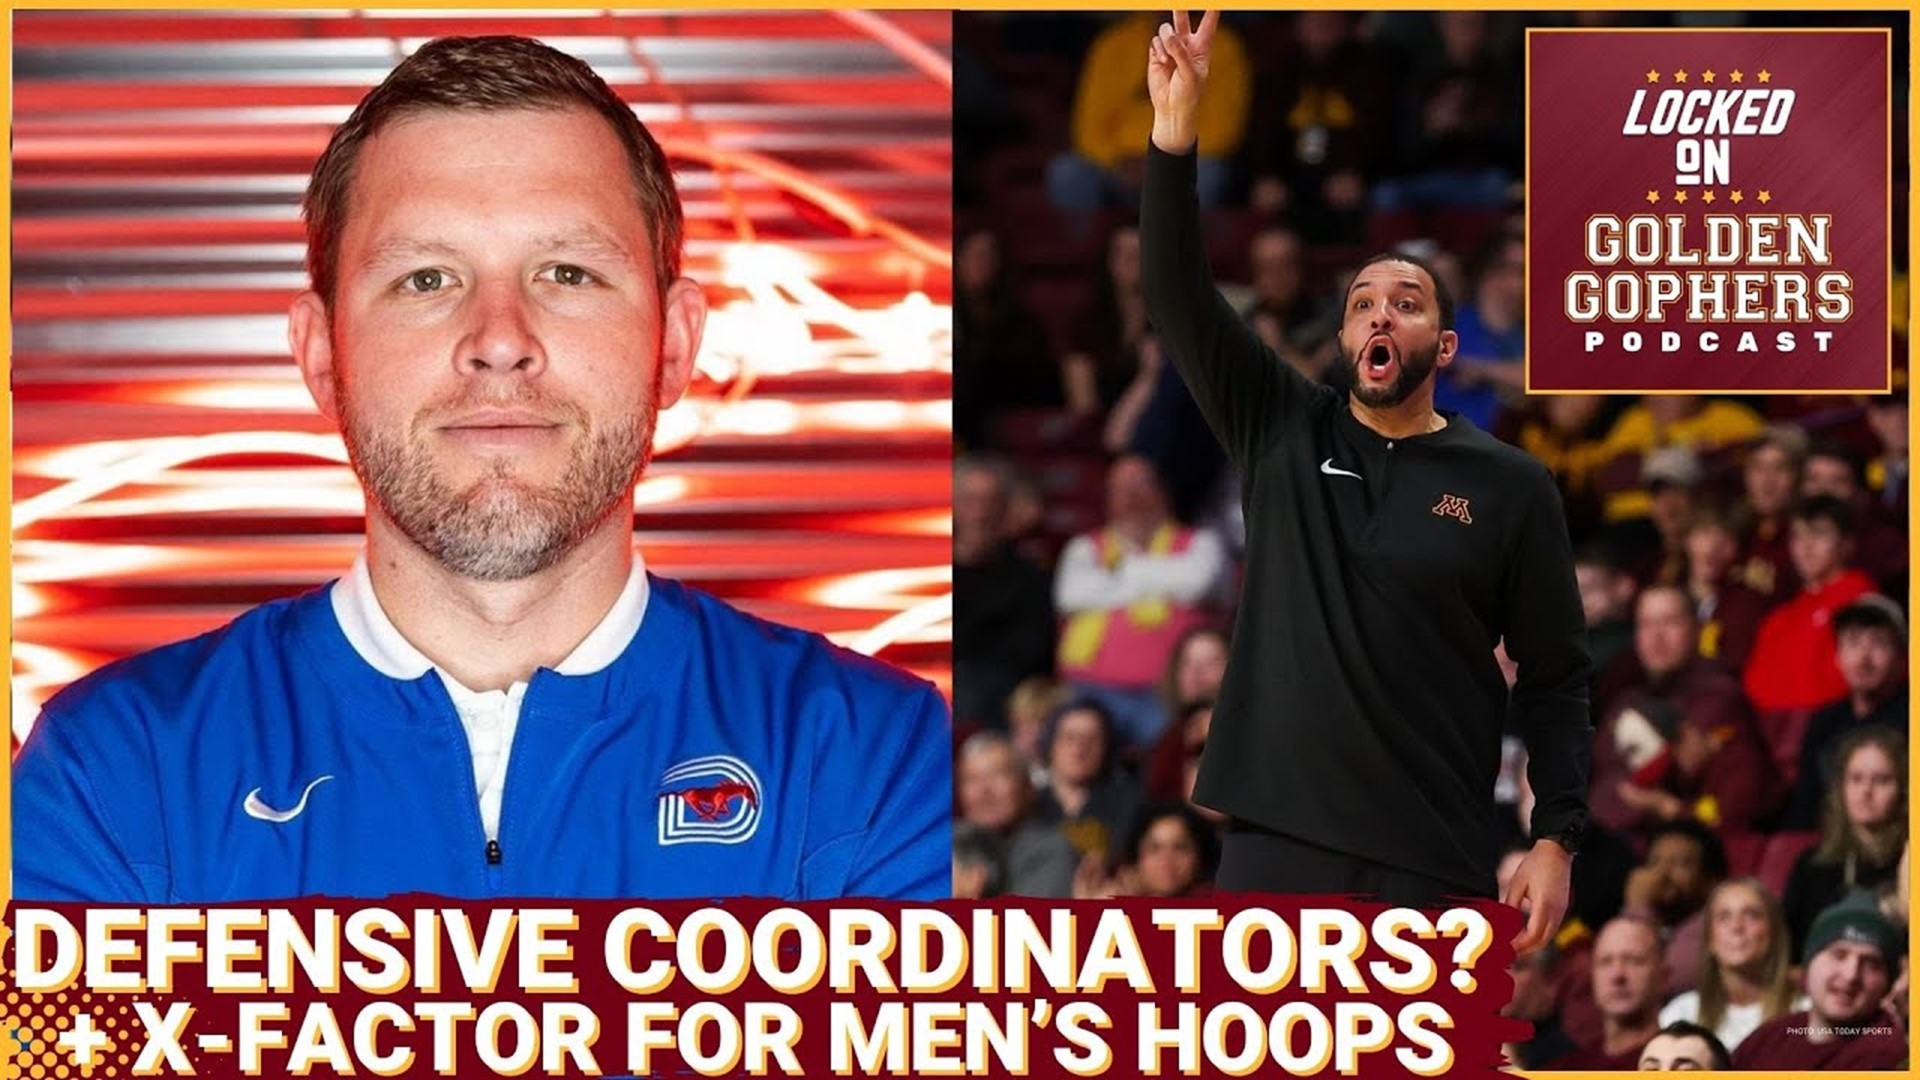 On today's episode of the Locked On Golden Gophers podcast, we discuss options I would love as the Defensive Coordinator for the Minnesota Gophers.